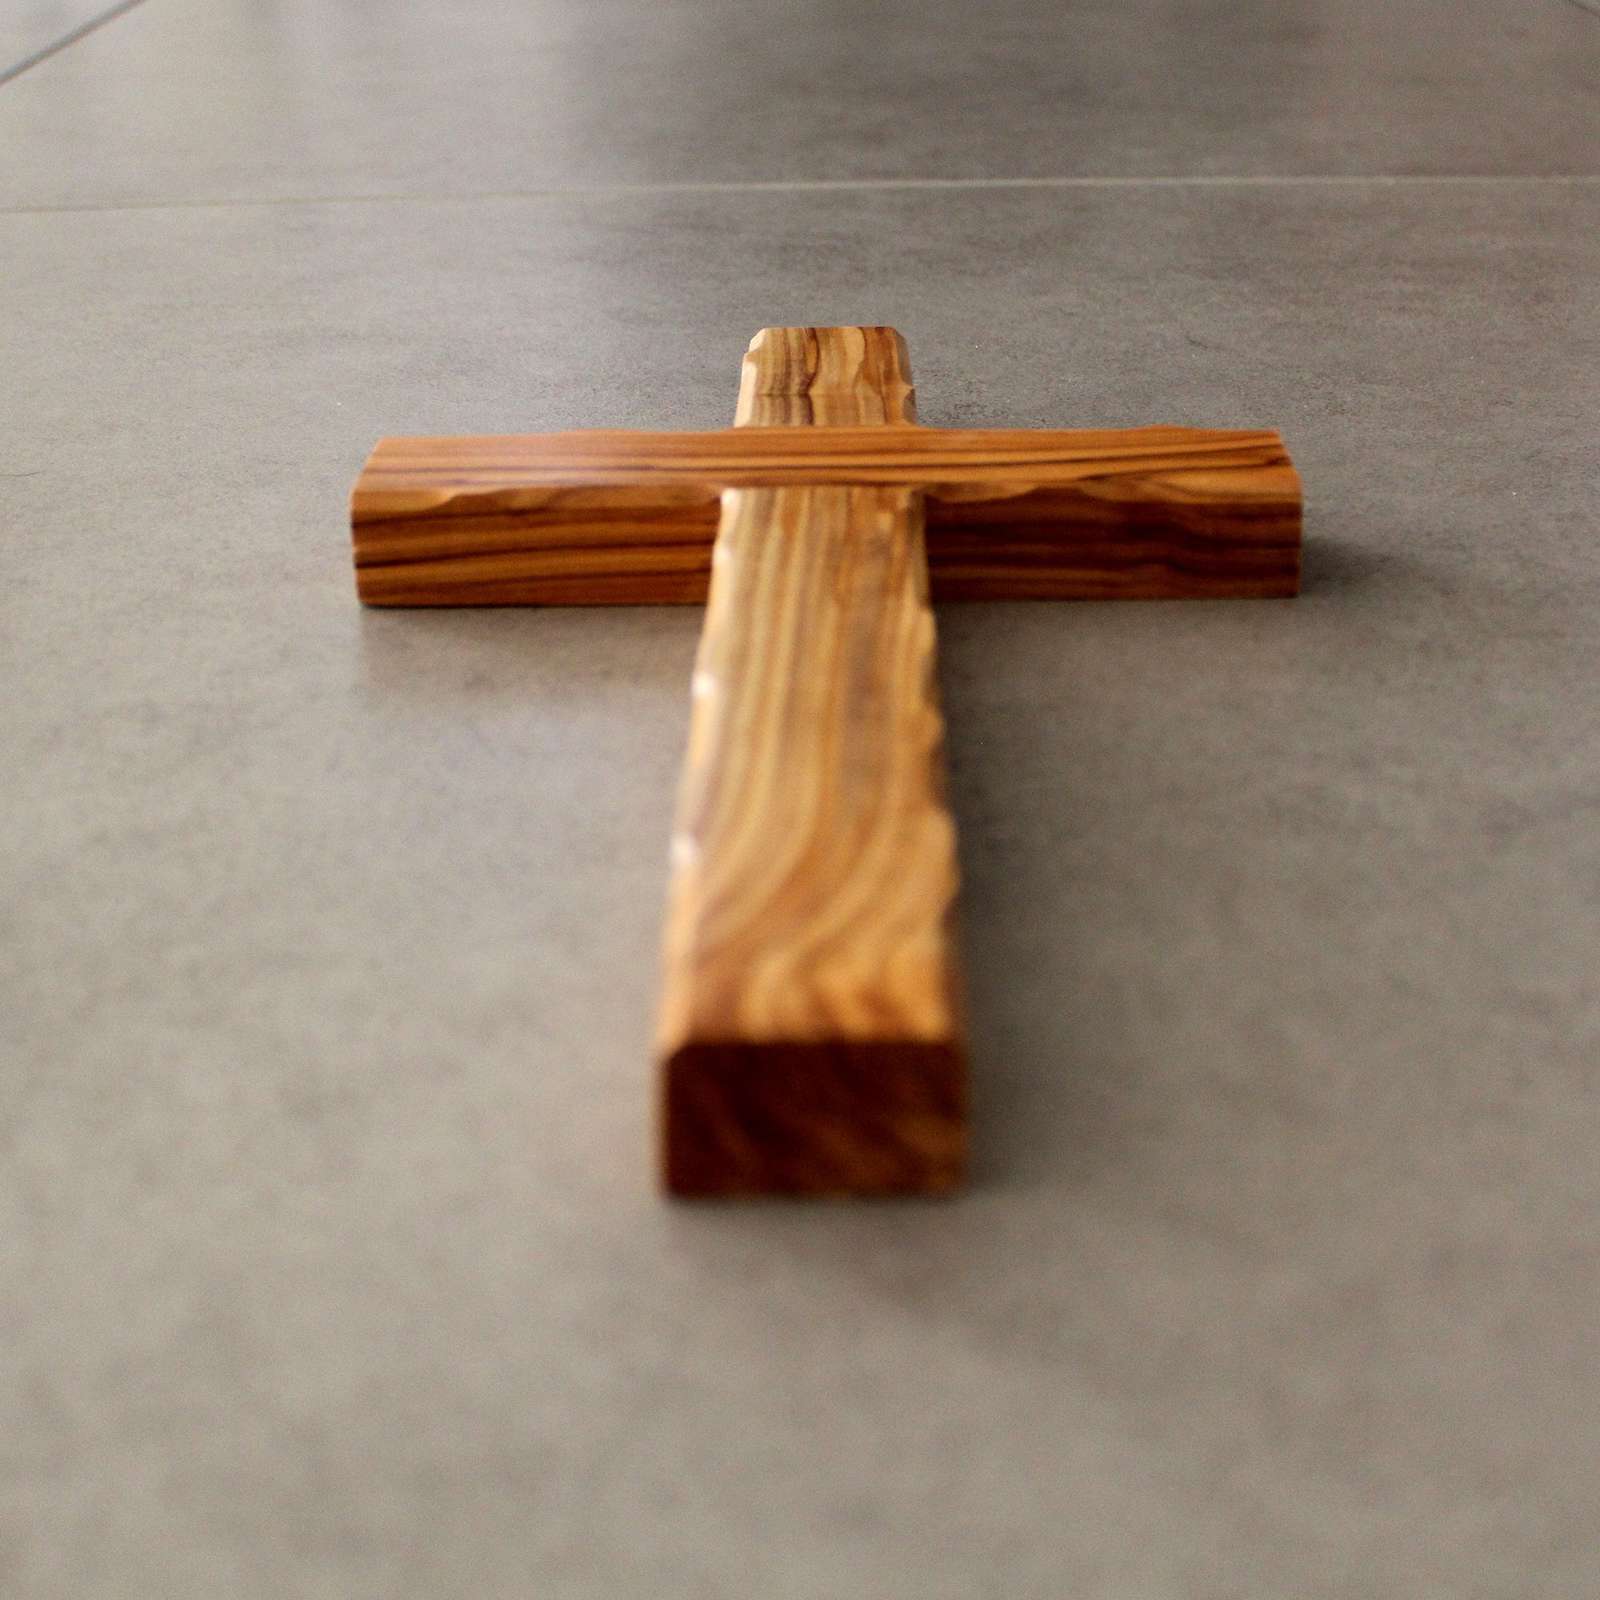 Primary image for 6" Olive Wood  (Wavy Edge) Cross, a Simple Design. Great for Wall Hanging, Confi